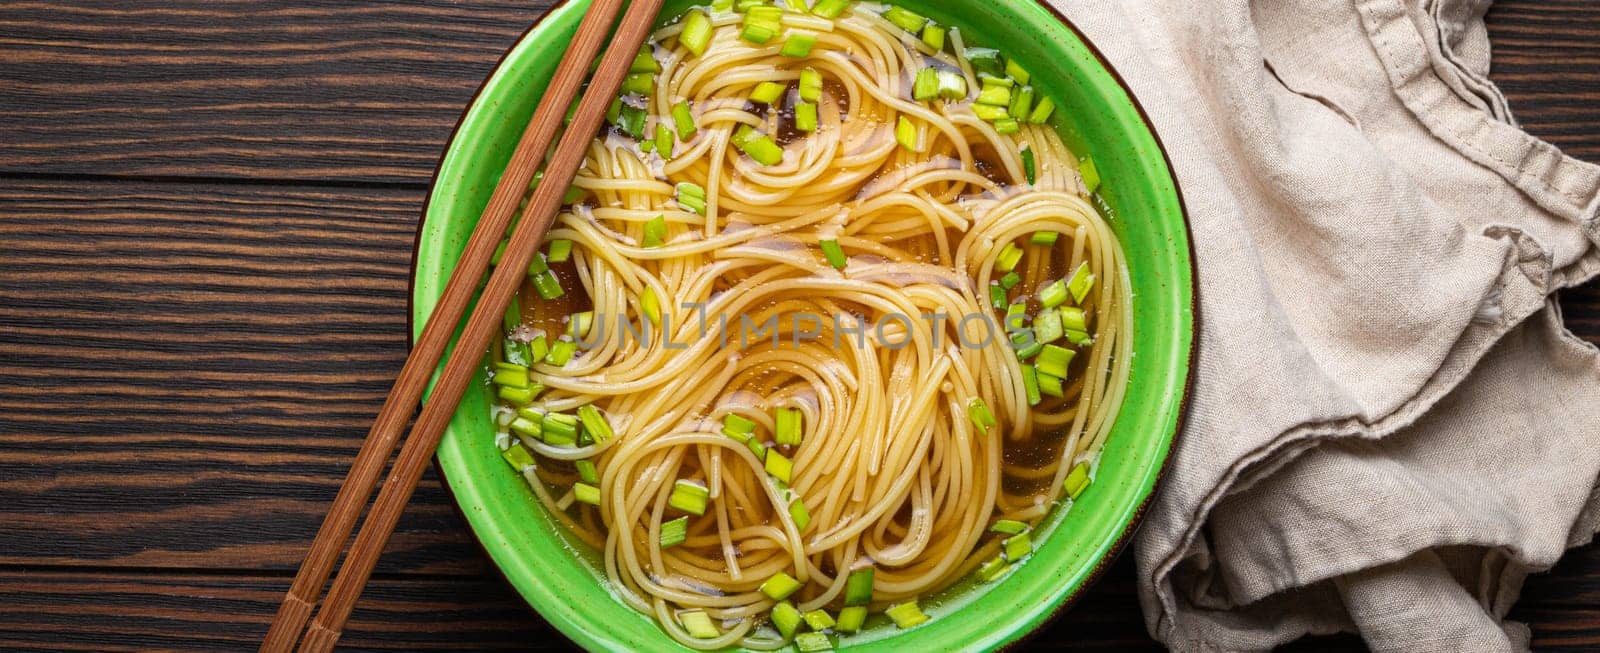 Asian noodles soup in green rustic ceramic bowl with wooden chopsticks top view on dark wooden background. Lo mein noodles with broth, green onion by its_al_dente